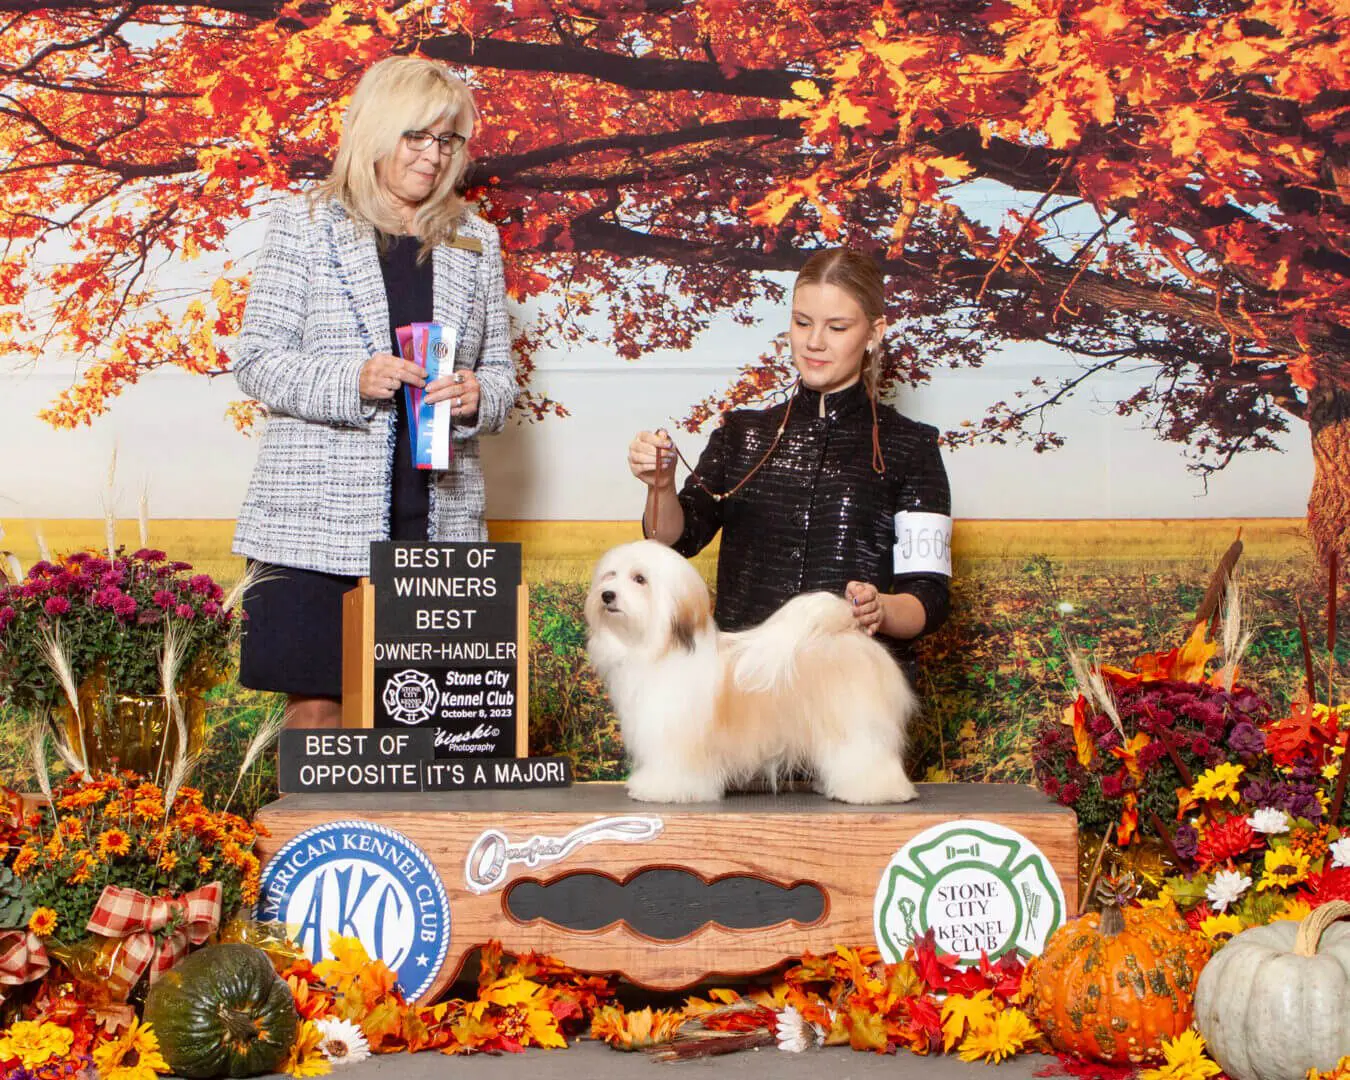 A woman is standing next to a white dog in front of a display of fall decorations. She is showcasing her Havanesand Havanese puppies.